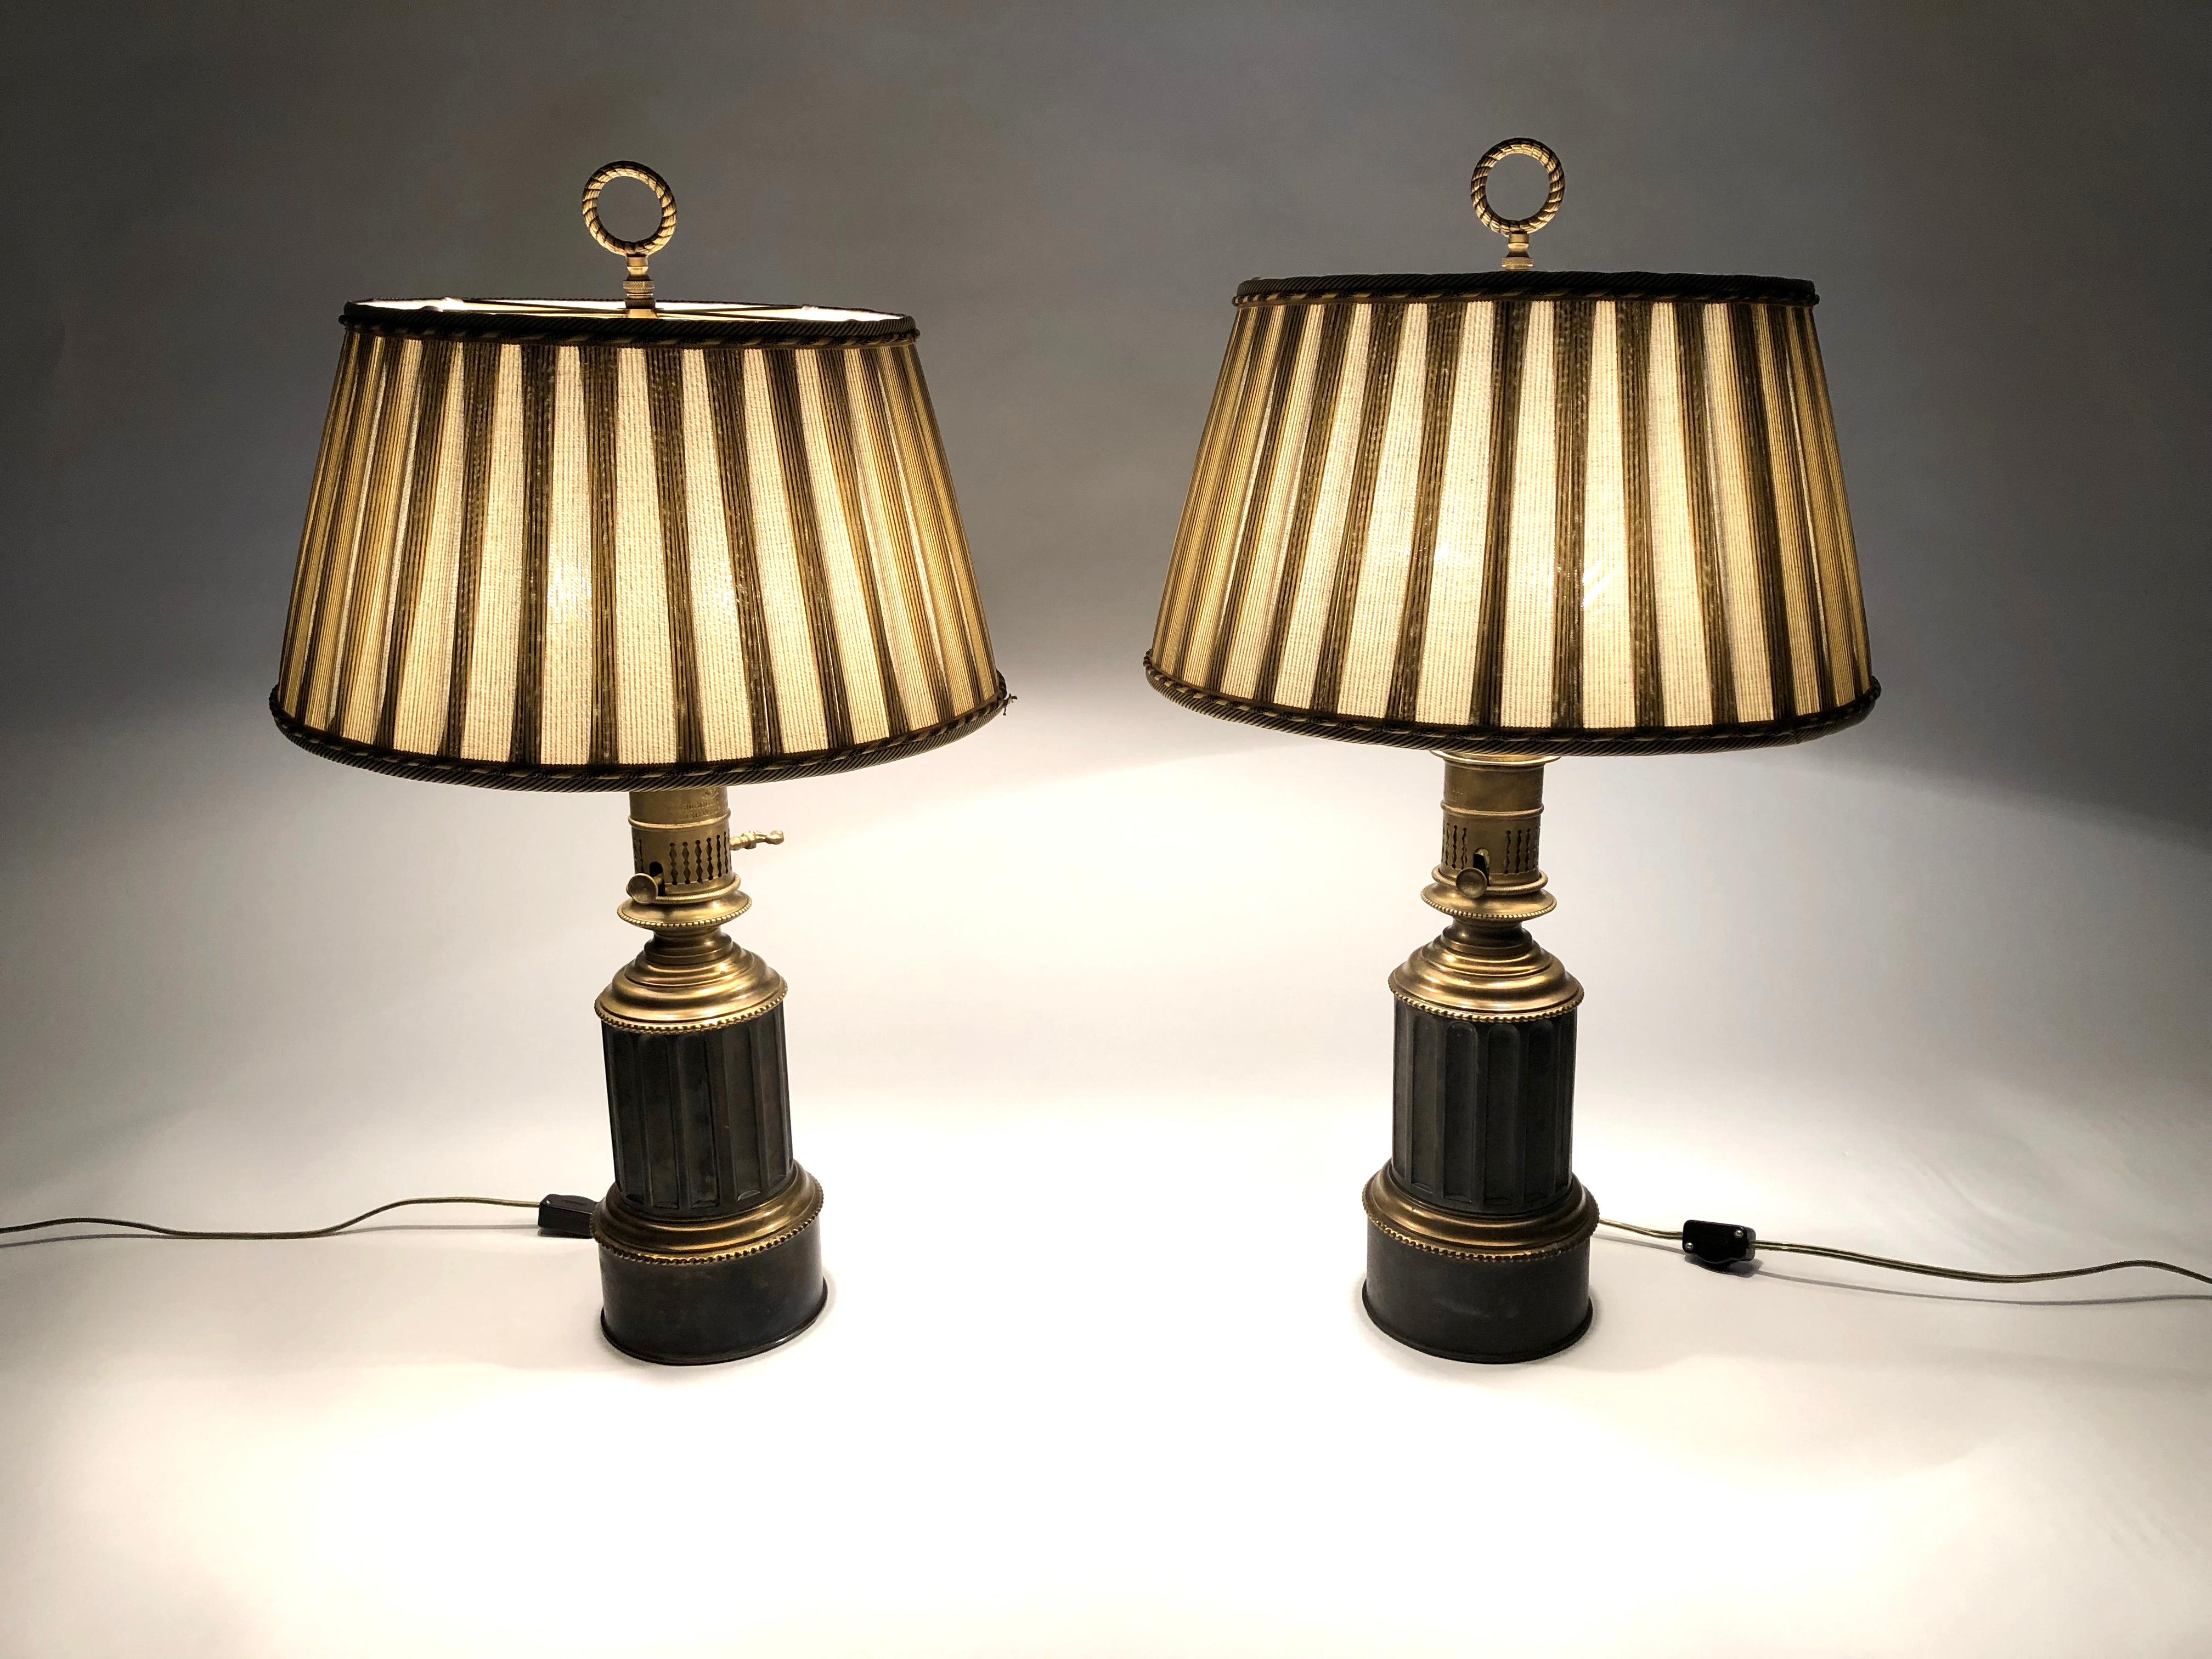 Pair of French Neoclassical Brass and Steel Lamps by Neuberger, Paris 3